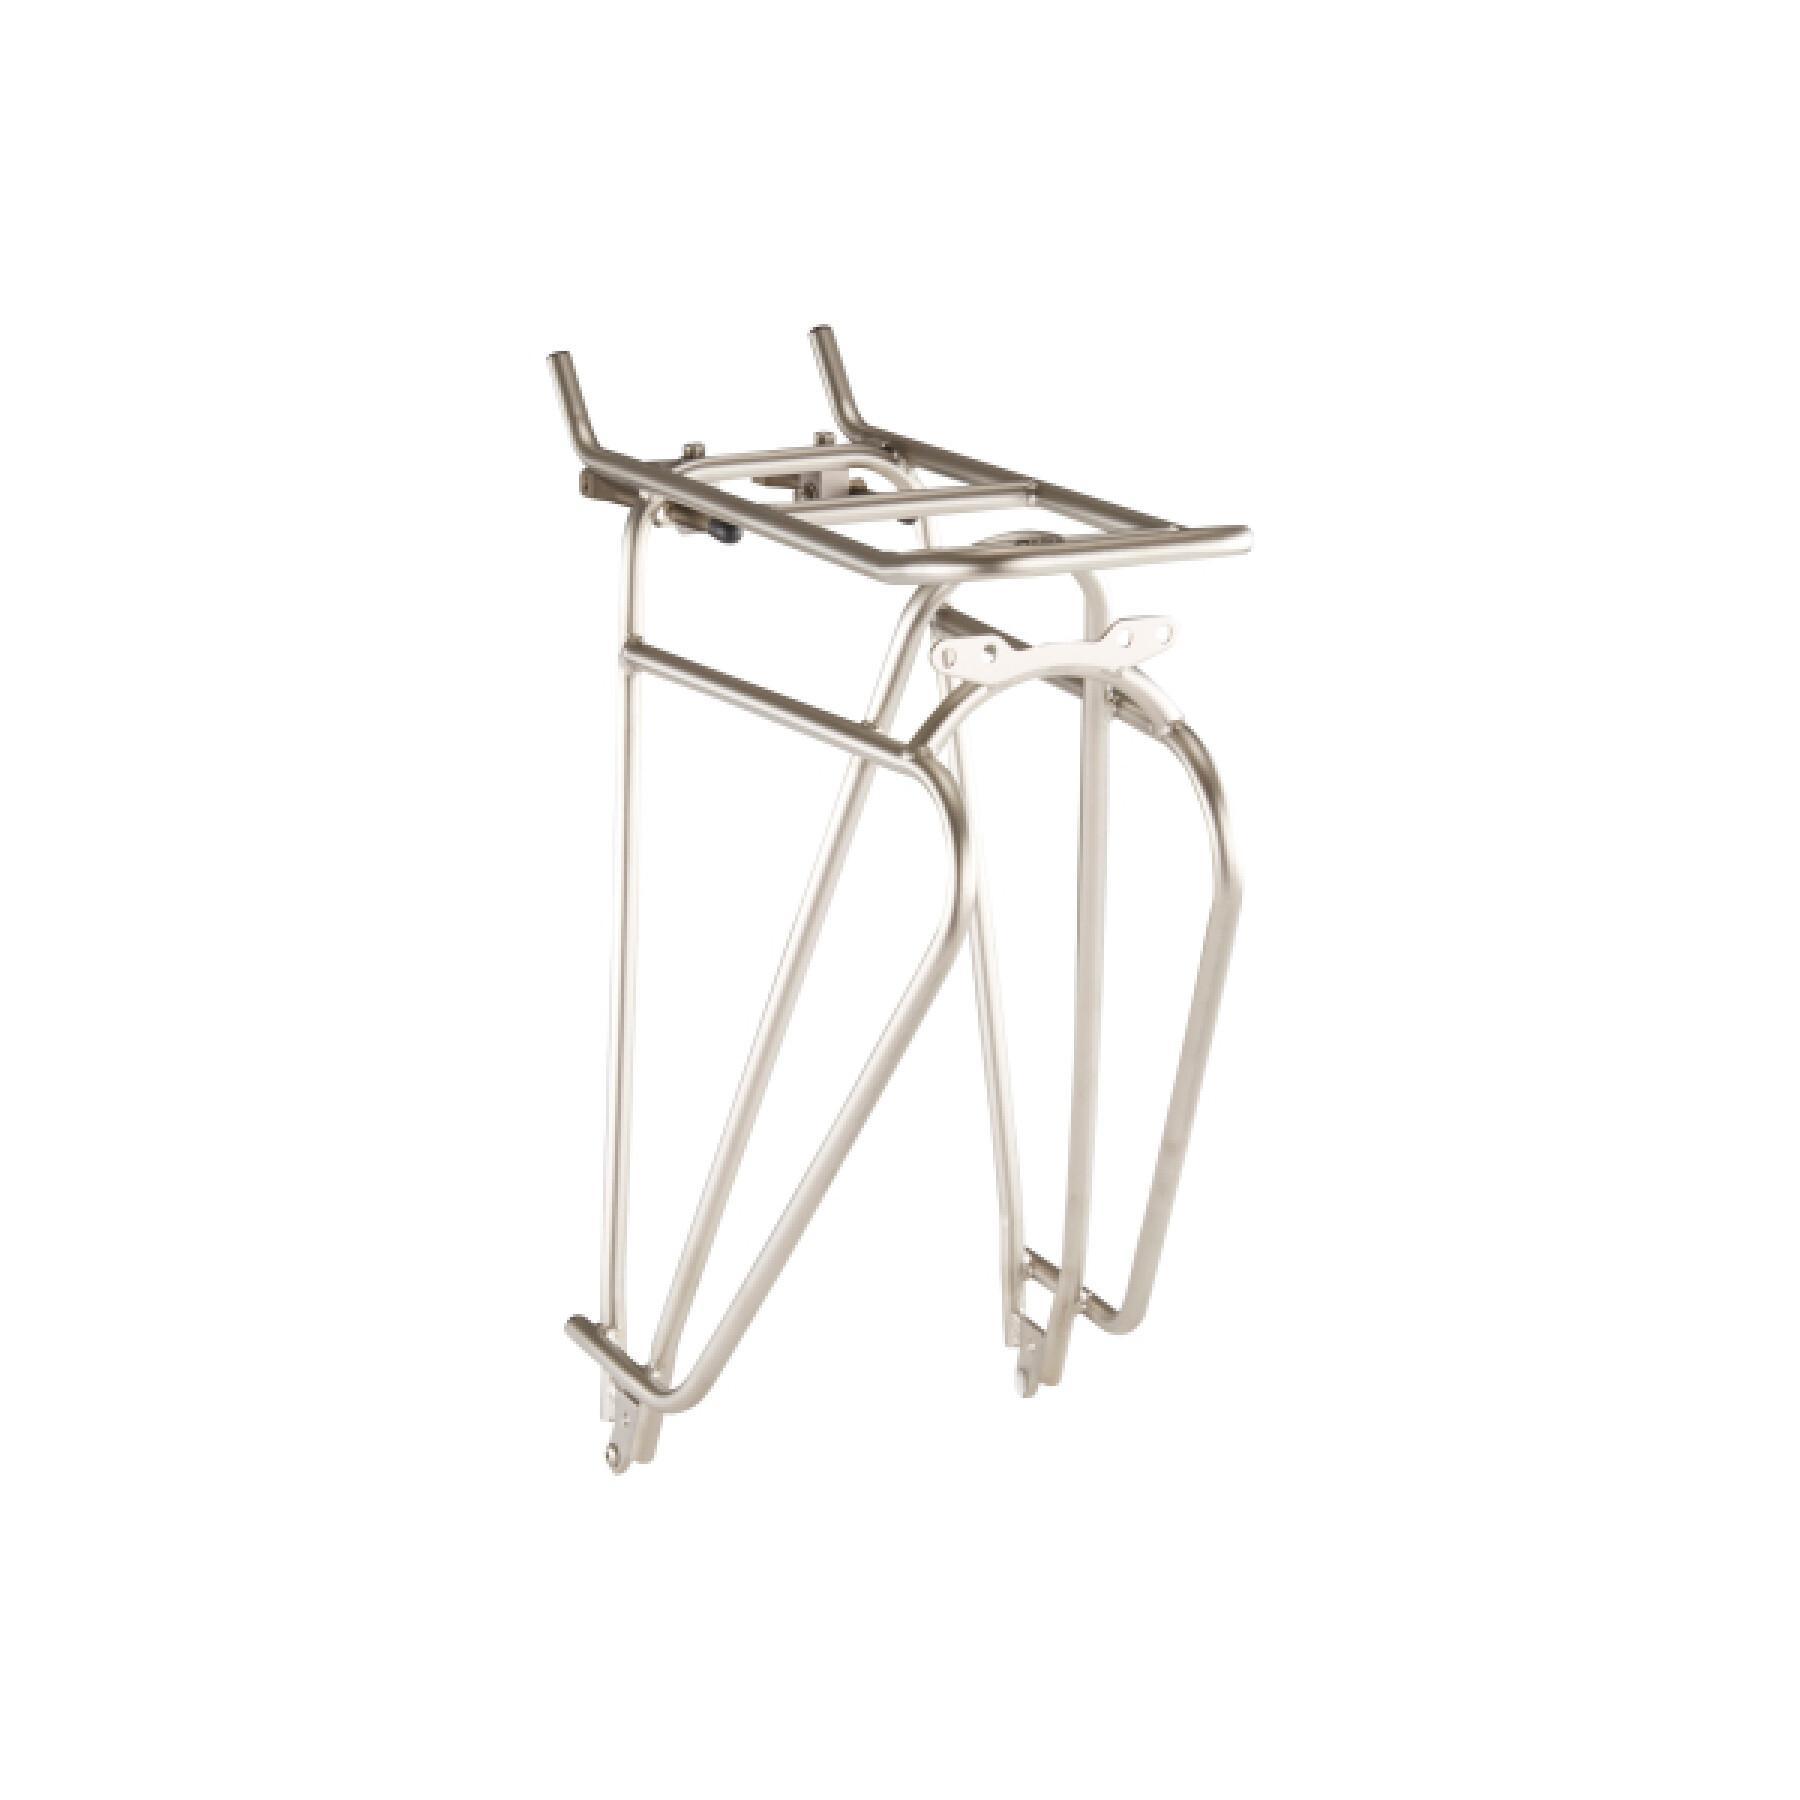 Stainless steel luggage rack Tubus Cosmo